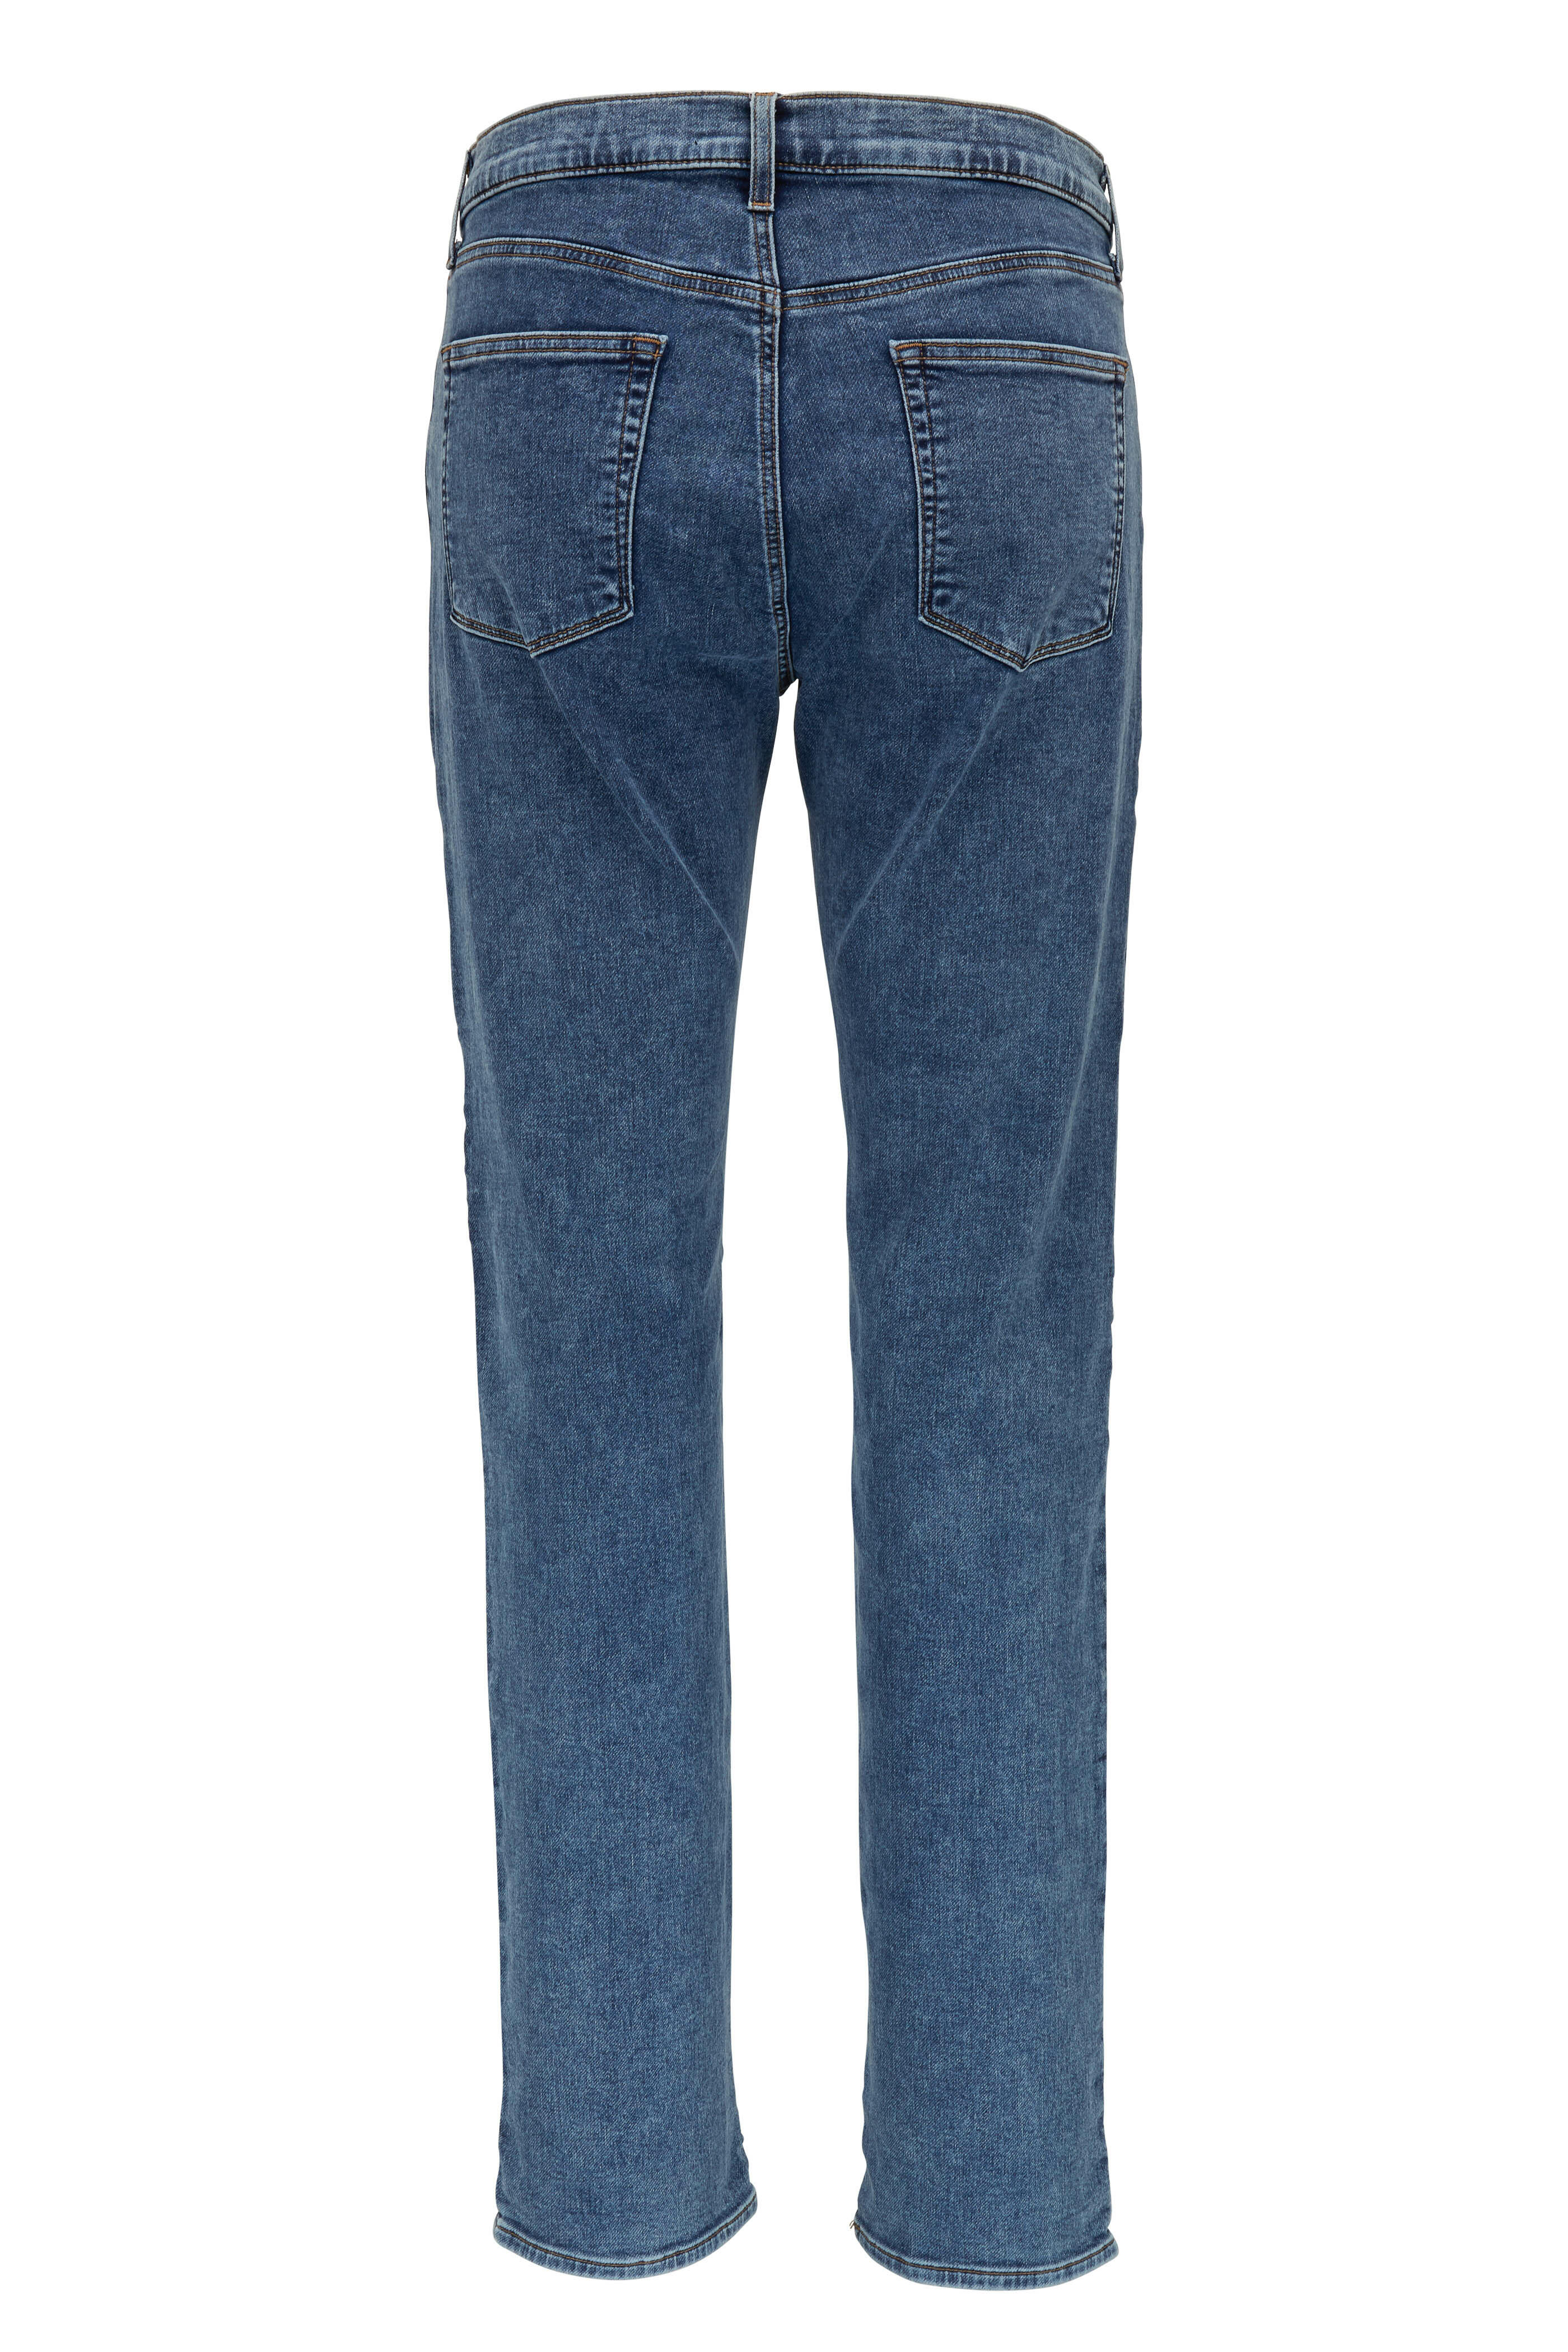 J Brand - Kane Burville French Terry Straight Fit Jean